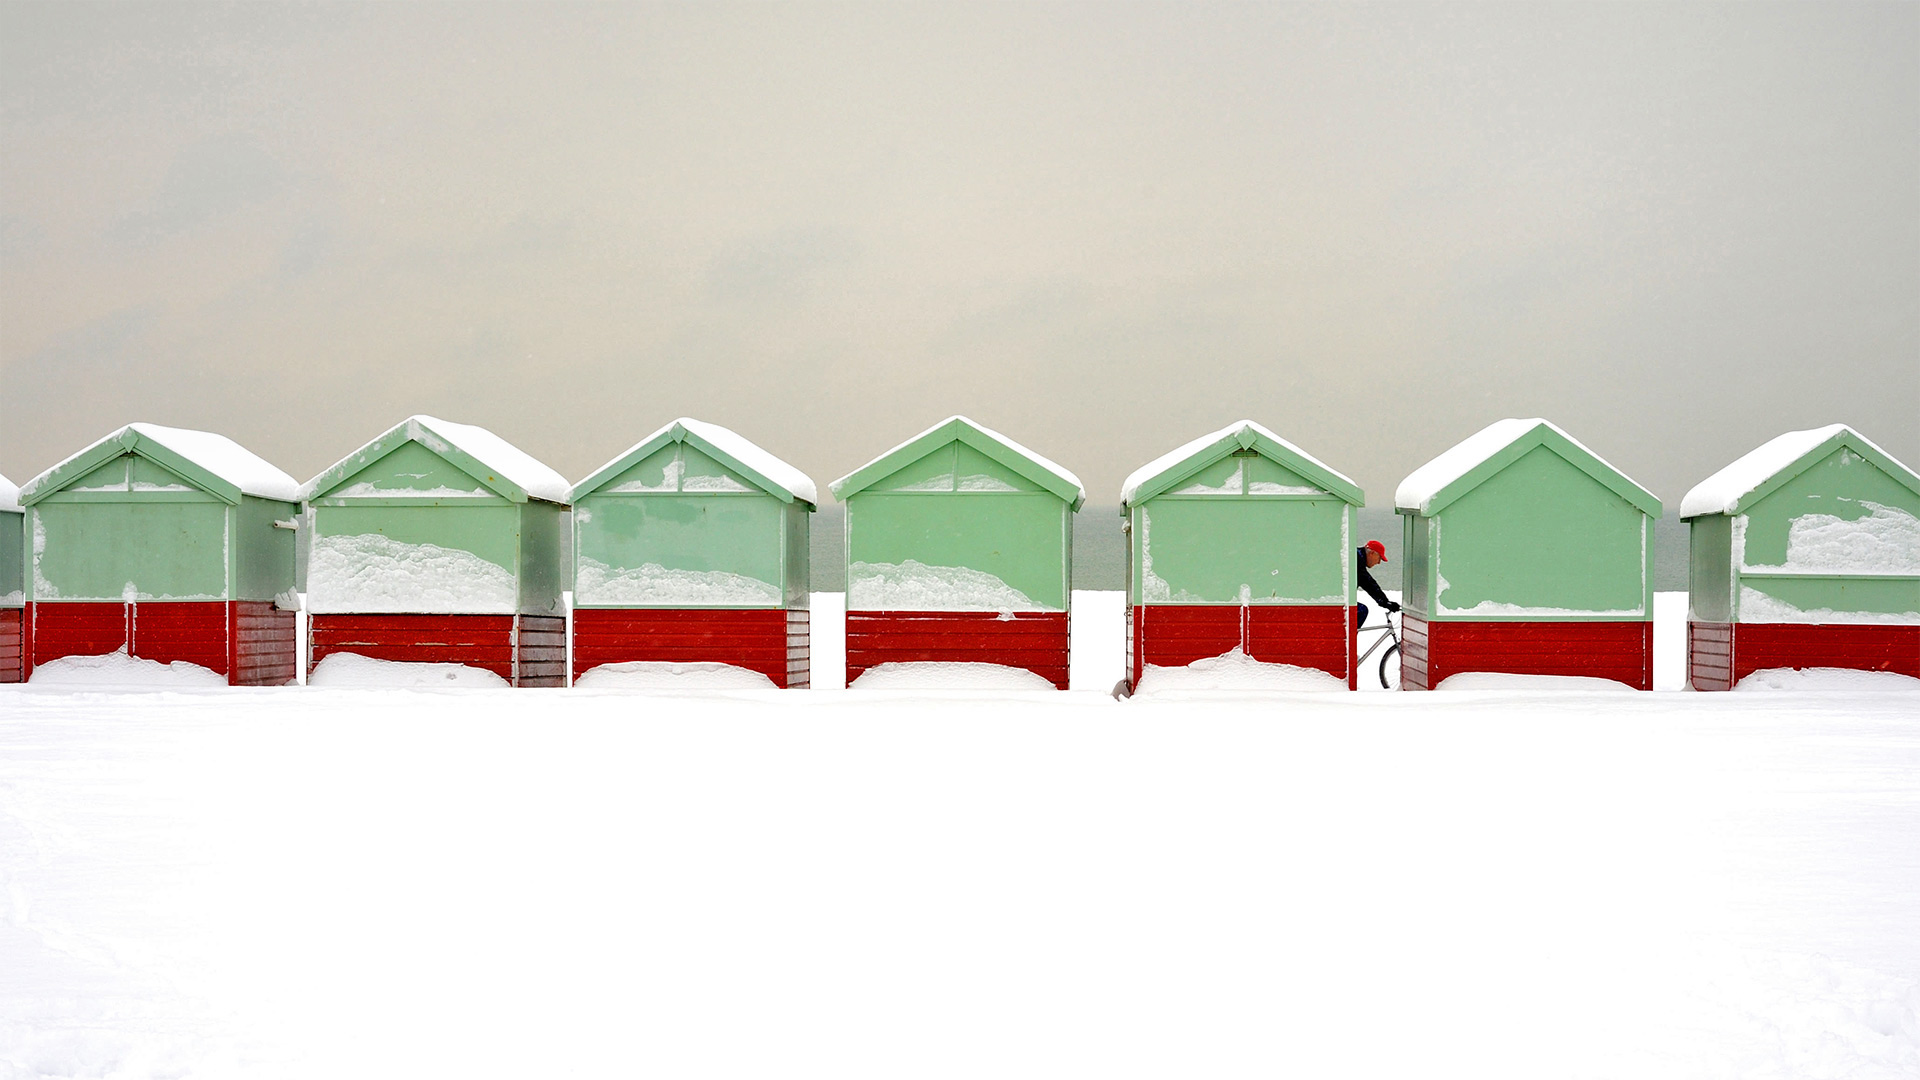 Beach huts covered in snow in Brighton and Hove, England - Tim Jones/Alamy)